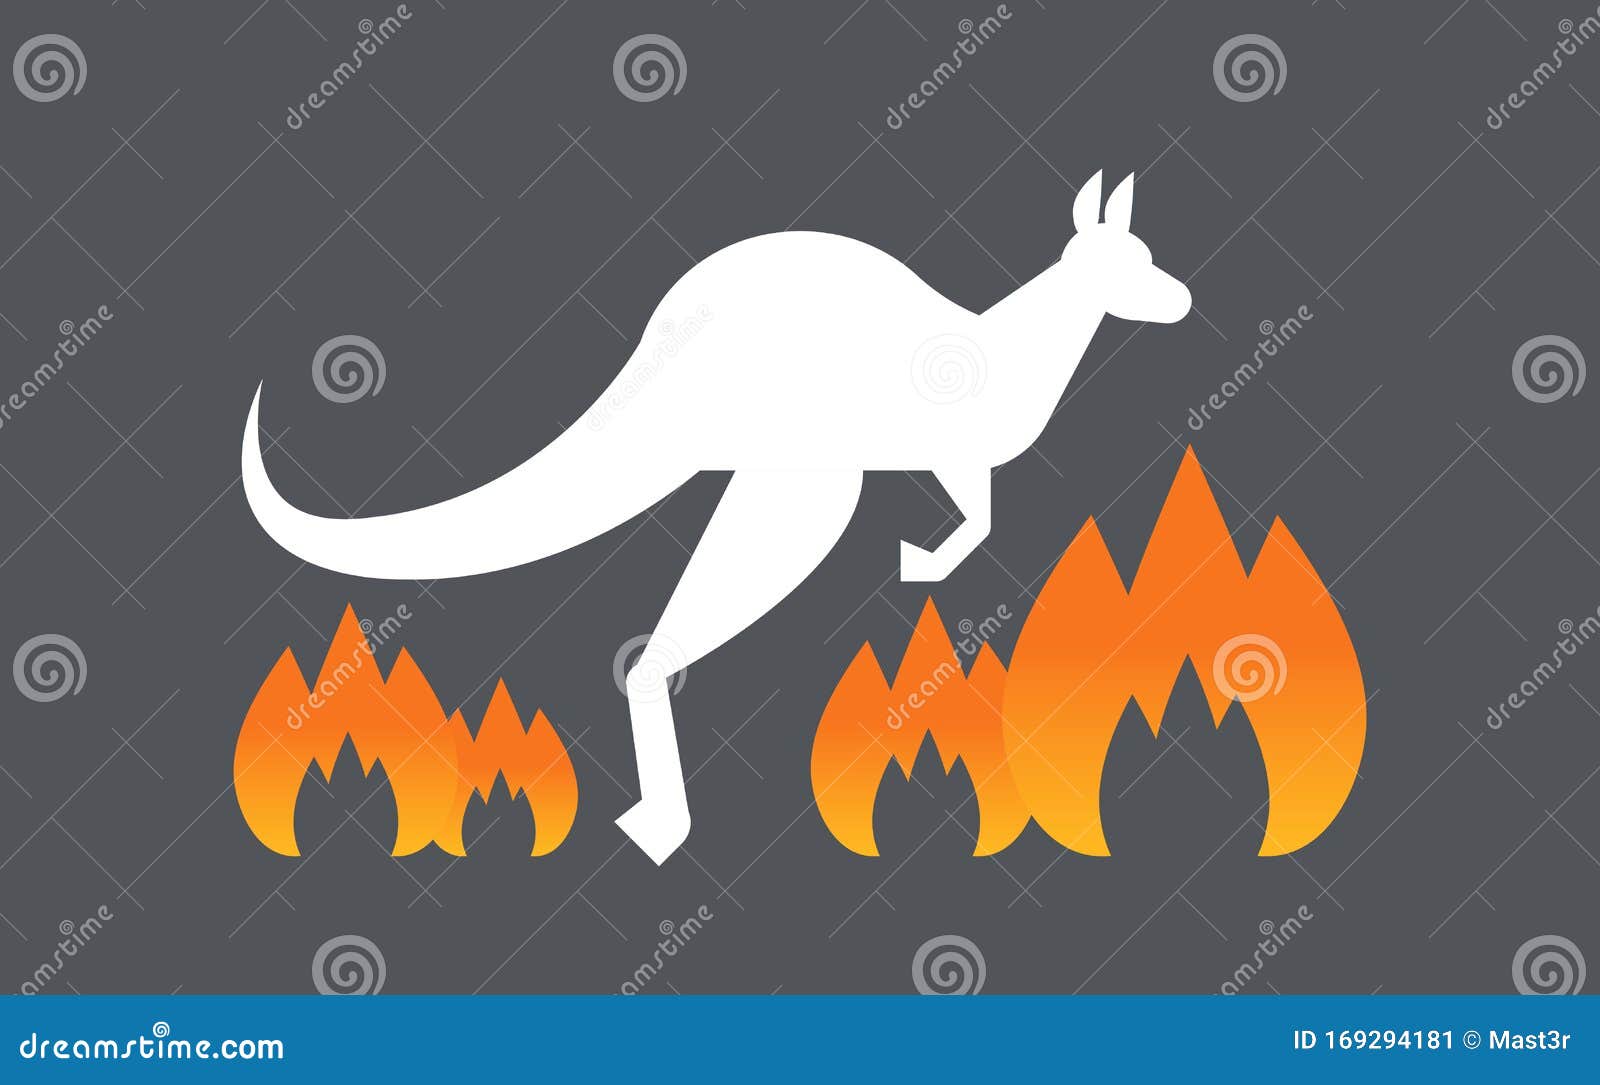 Kangaroo Running Escaping from Forest Wild Fires in Australia Animals Dying  in Wildfire Bush Fire Natural Disaster Stock Vector - Illustration of burn,  cartoon: 169294181